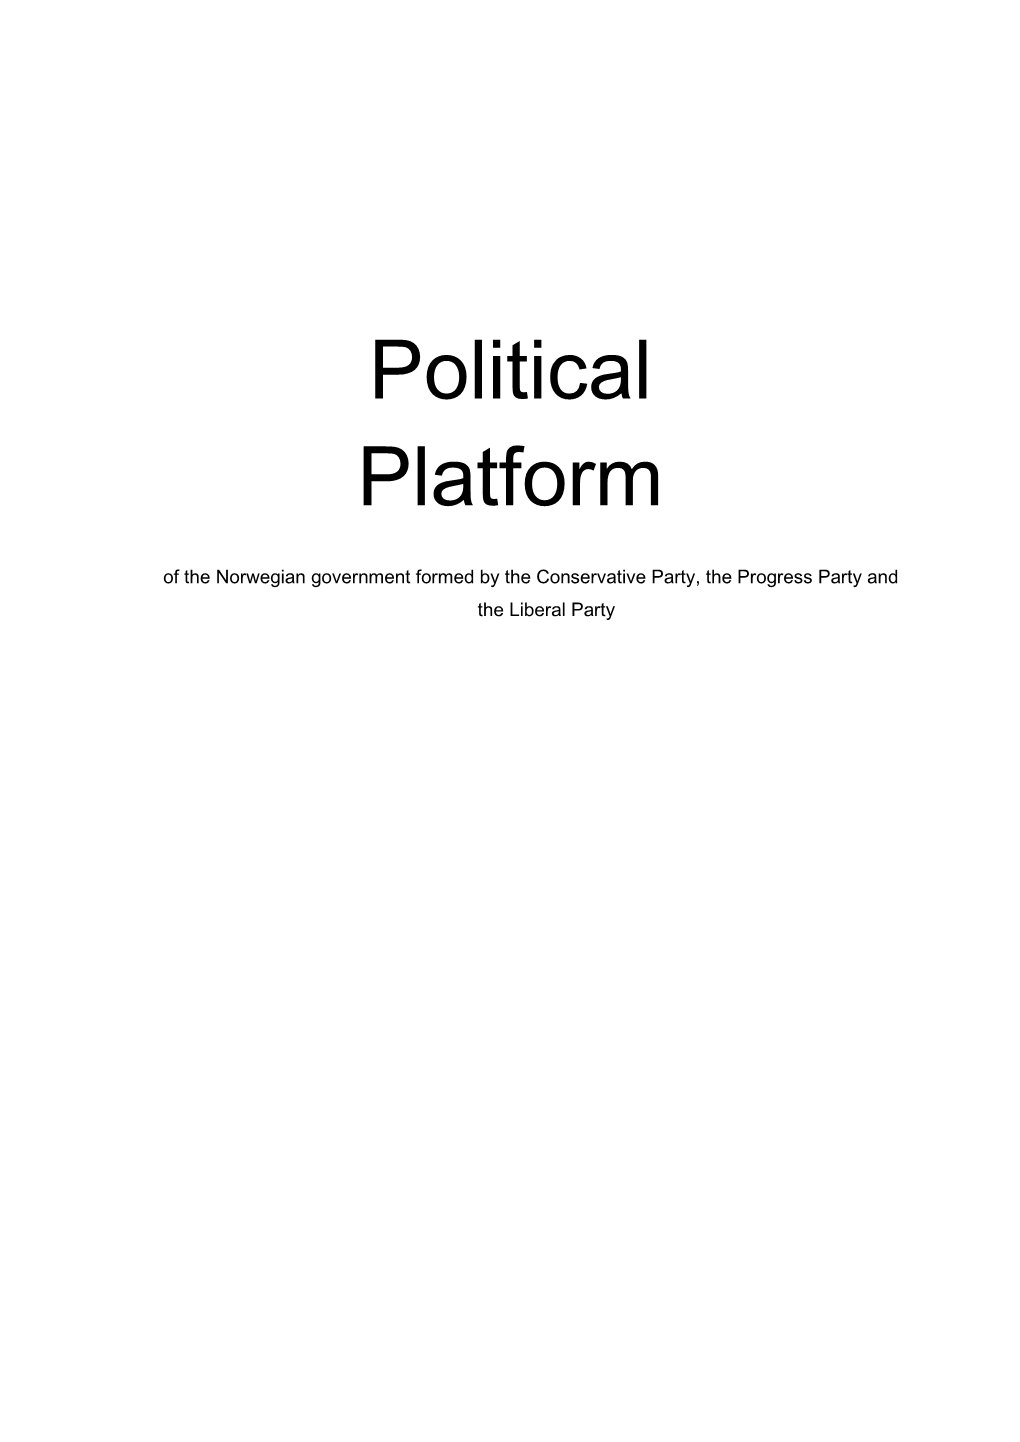 Political Platform of the Norwegian Government Formed by the Conservative Party, the Progress Party and the Liberal Party